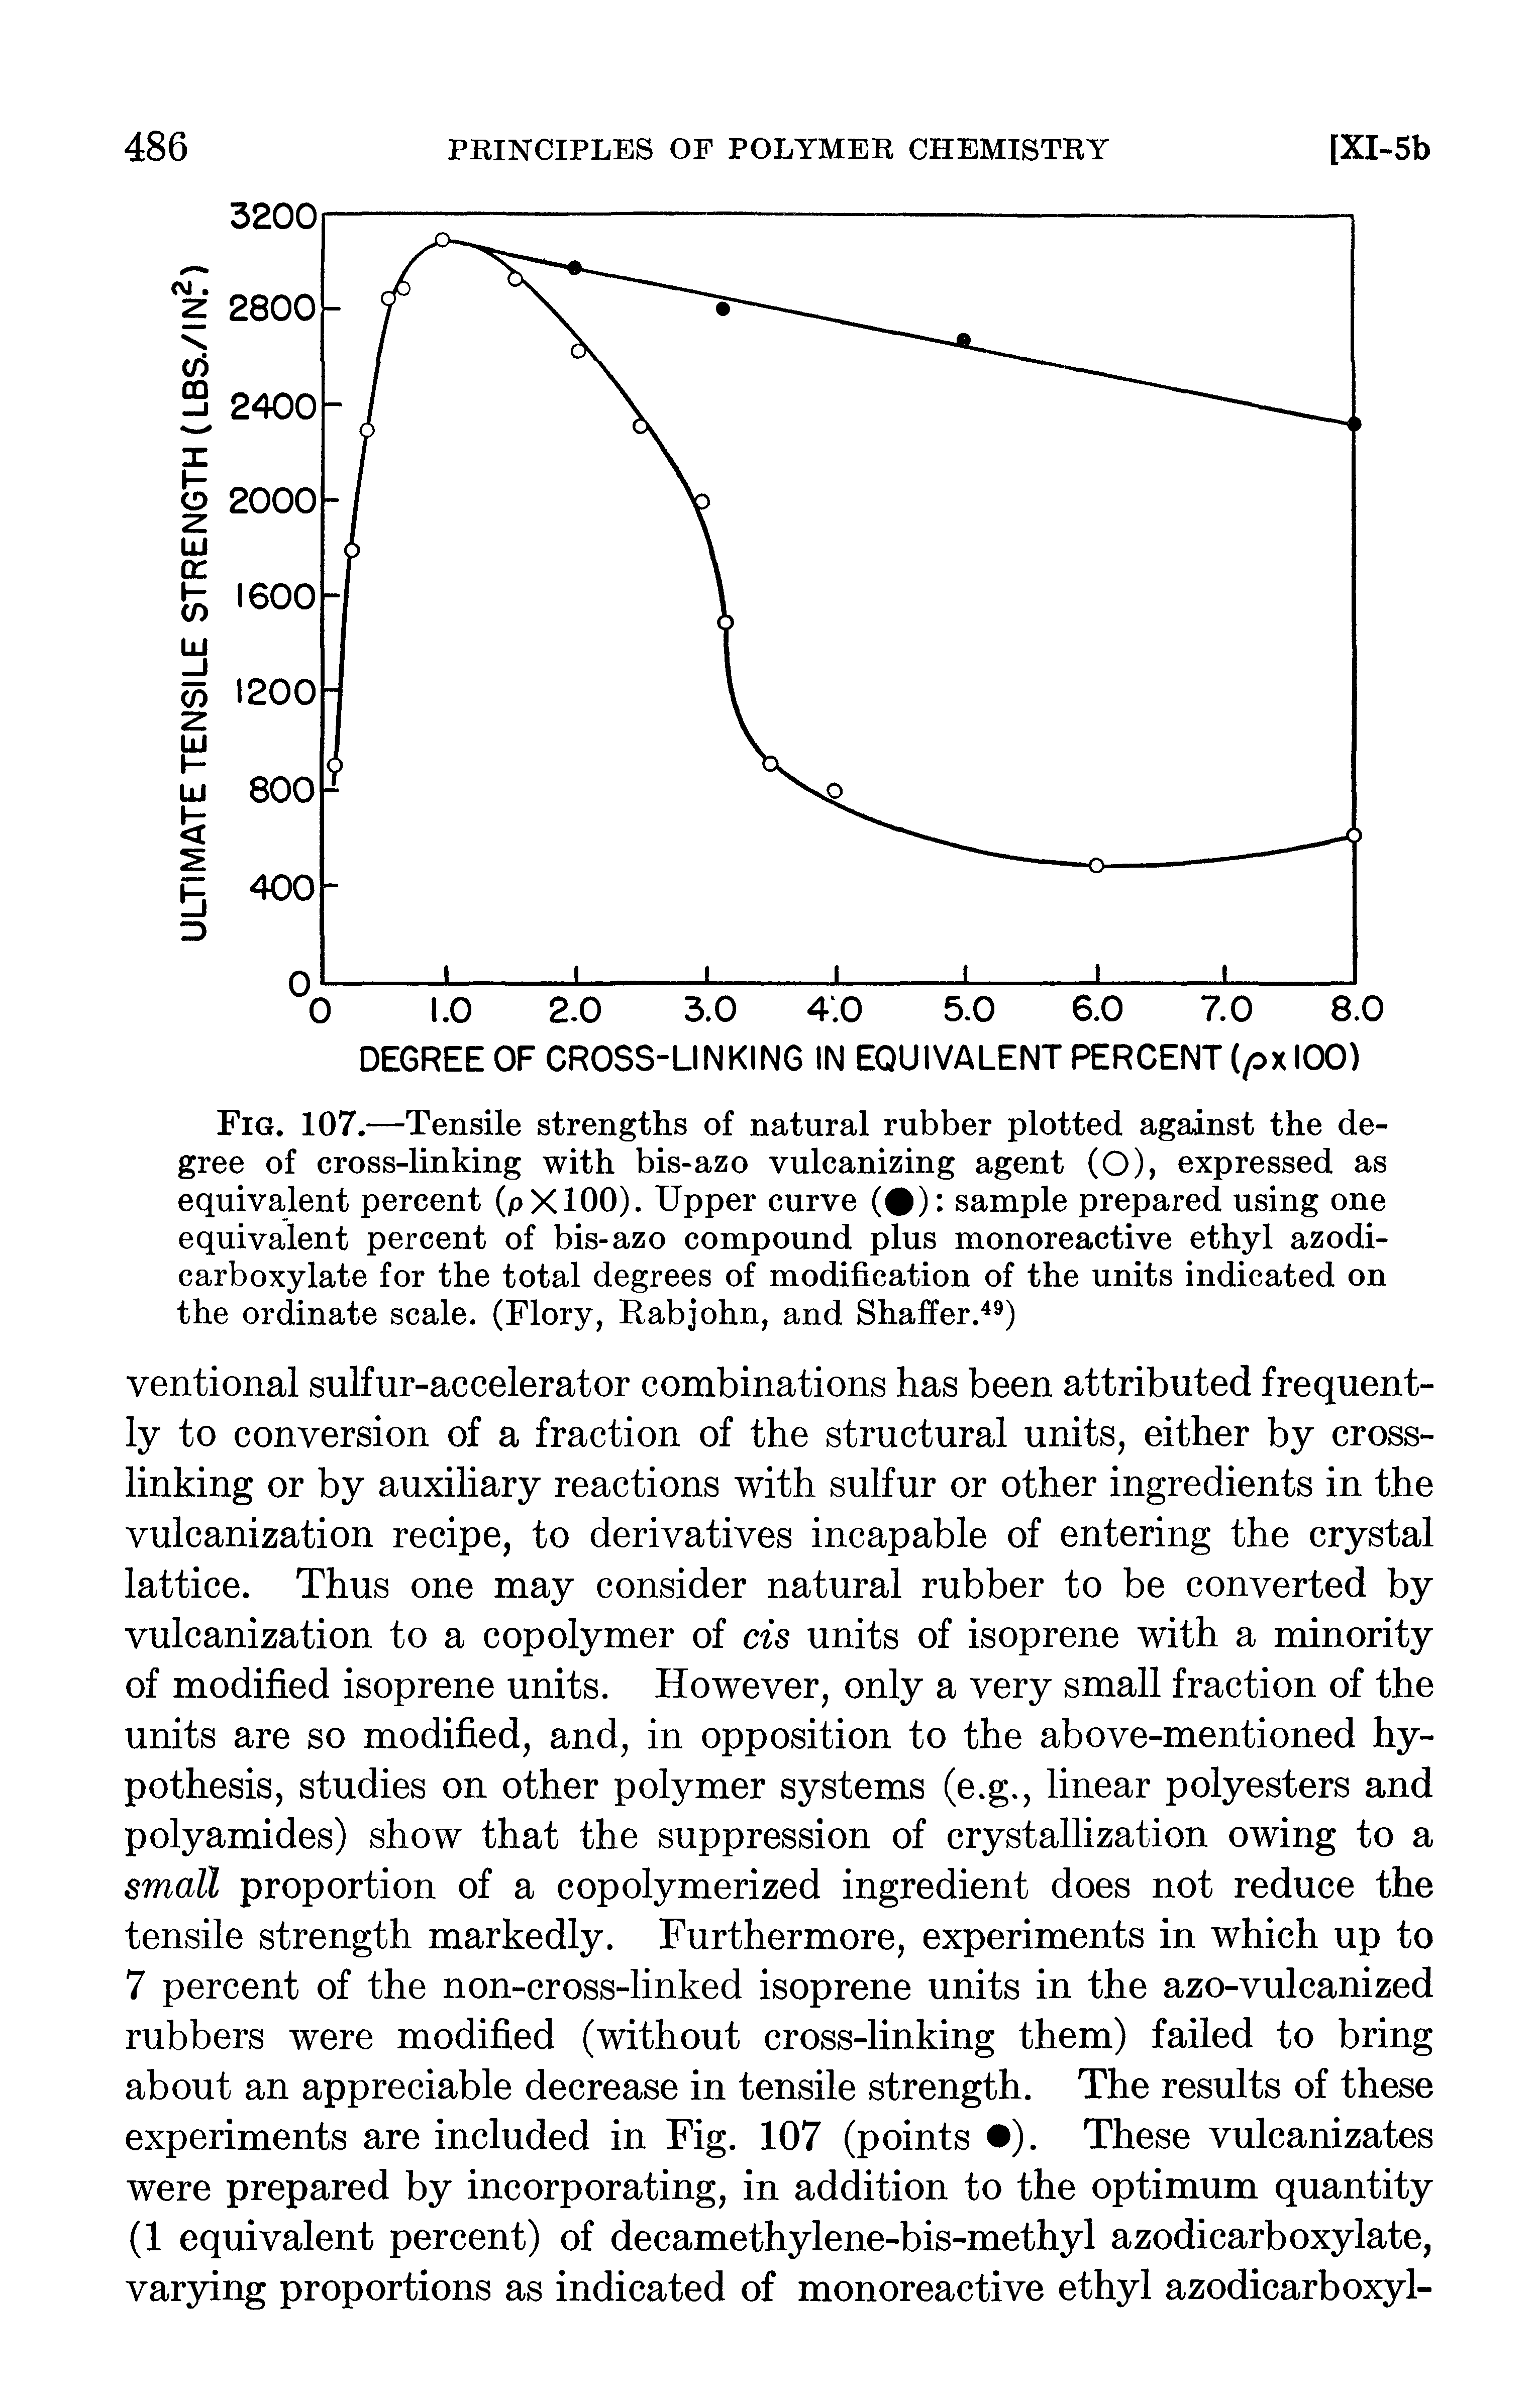 Fig. 107.—Tensile strengths of natural rubber plotted against the degree of cross-linking with bis-azo vulcanizing agent (O), expressed as equivalent percent (pXlOO). Upper curve ( ) sample prepared using one equivalent percent of bis-azo compound plus monoreactive ethyl azodi-carboxylate for the total degrees of modification of the units indicated on the ordinate scale. (Flory, Rabjohn, and Shaffer.